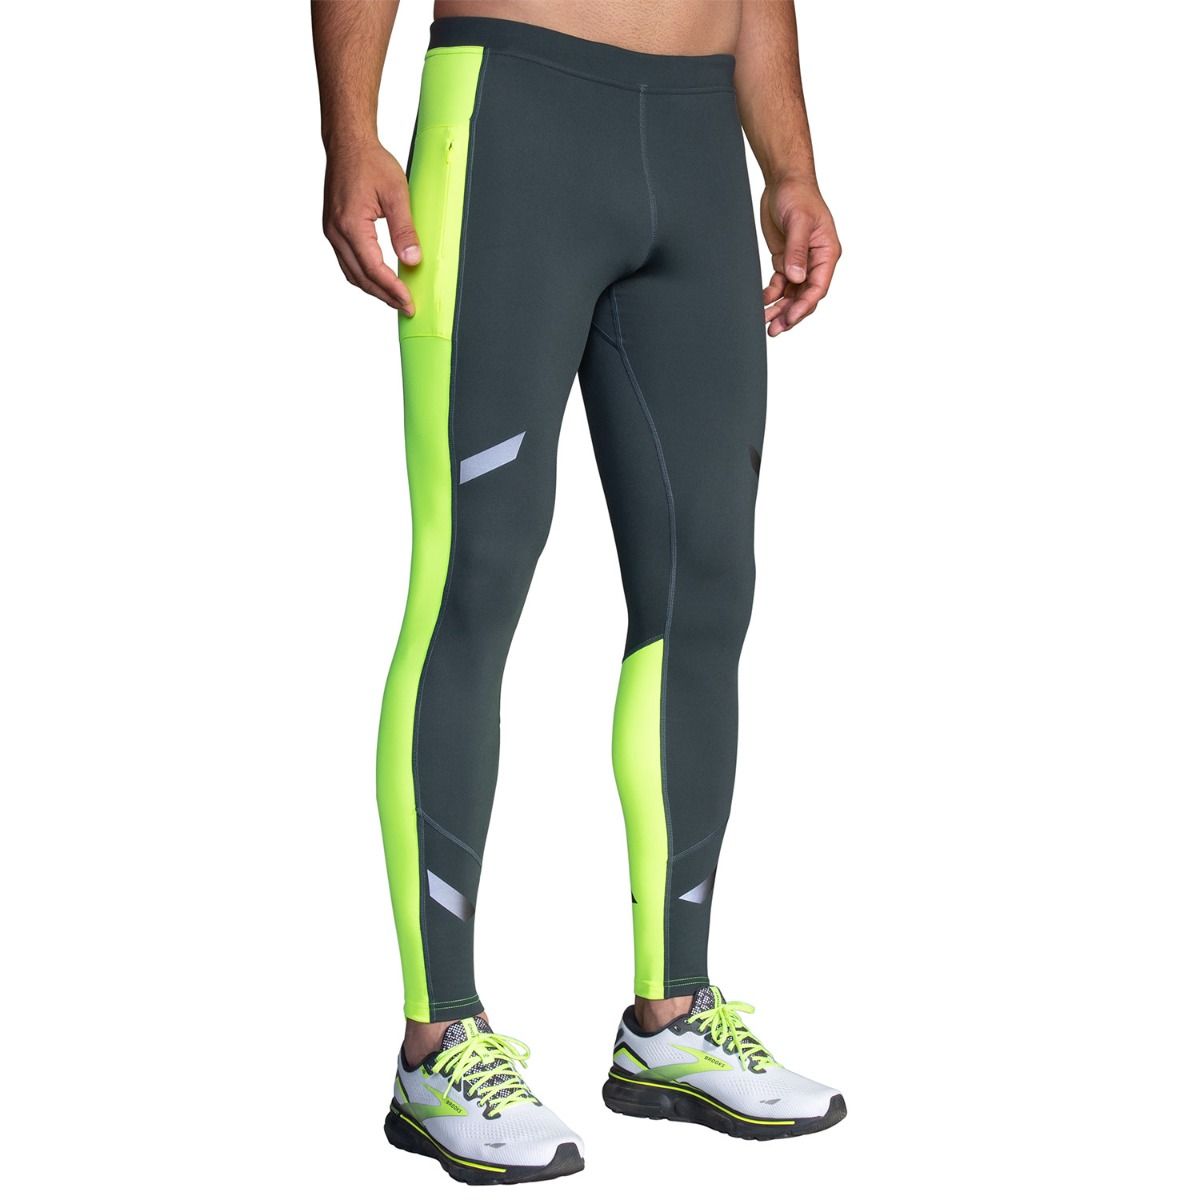 Brooks Running Tights Review: The 'Go-To Tight